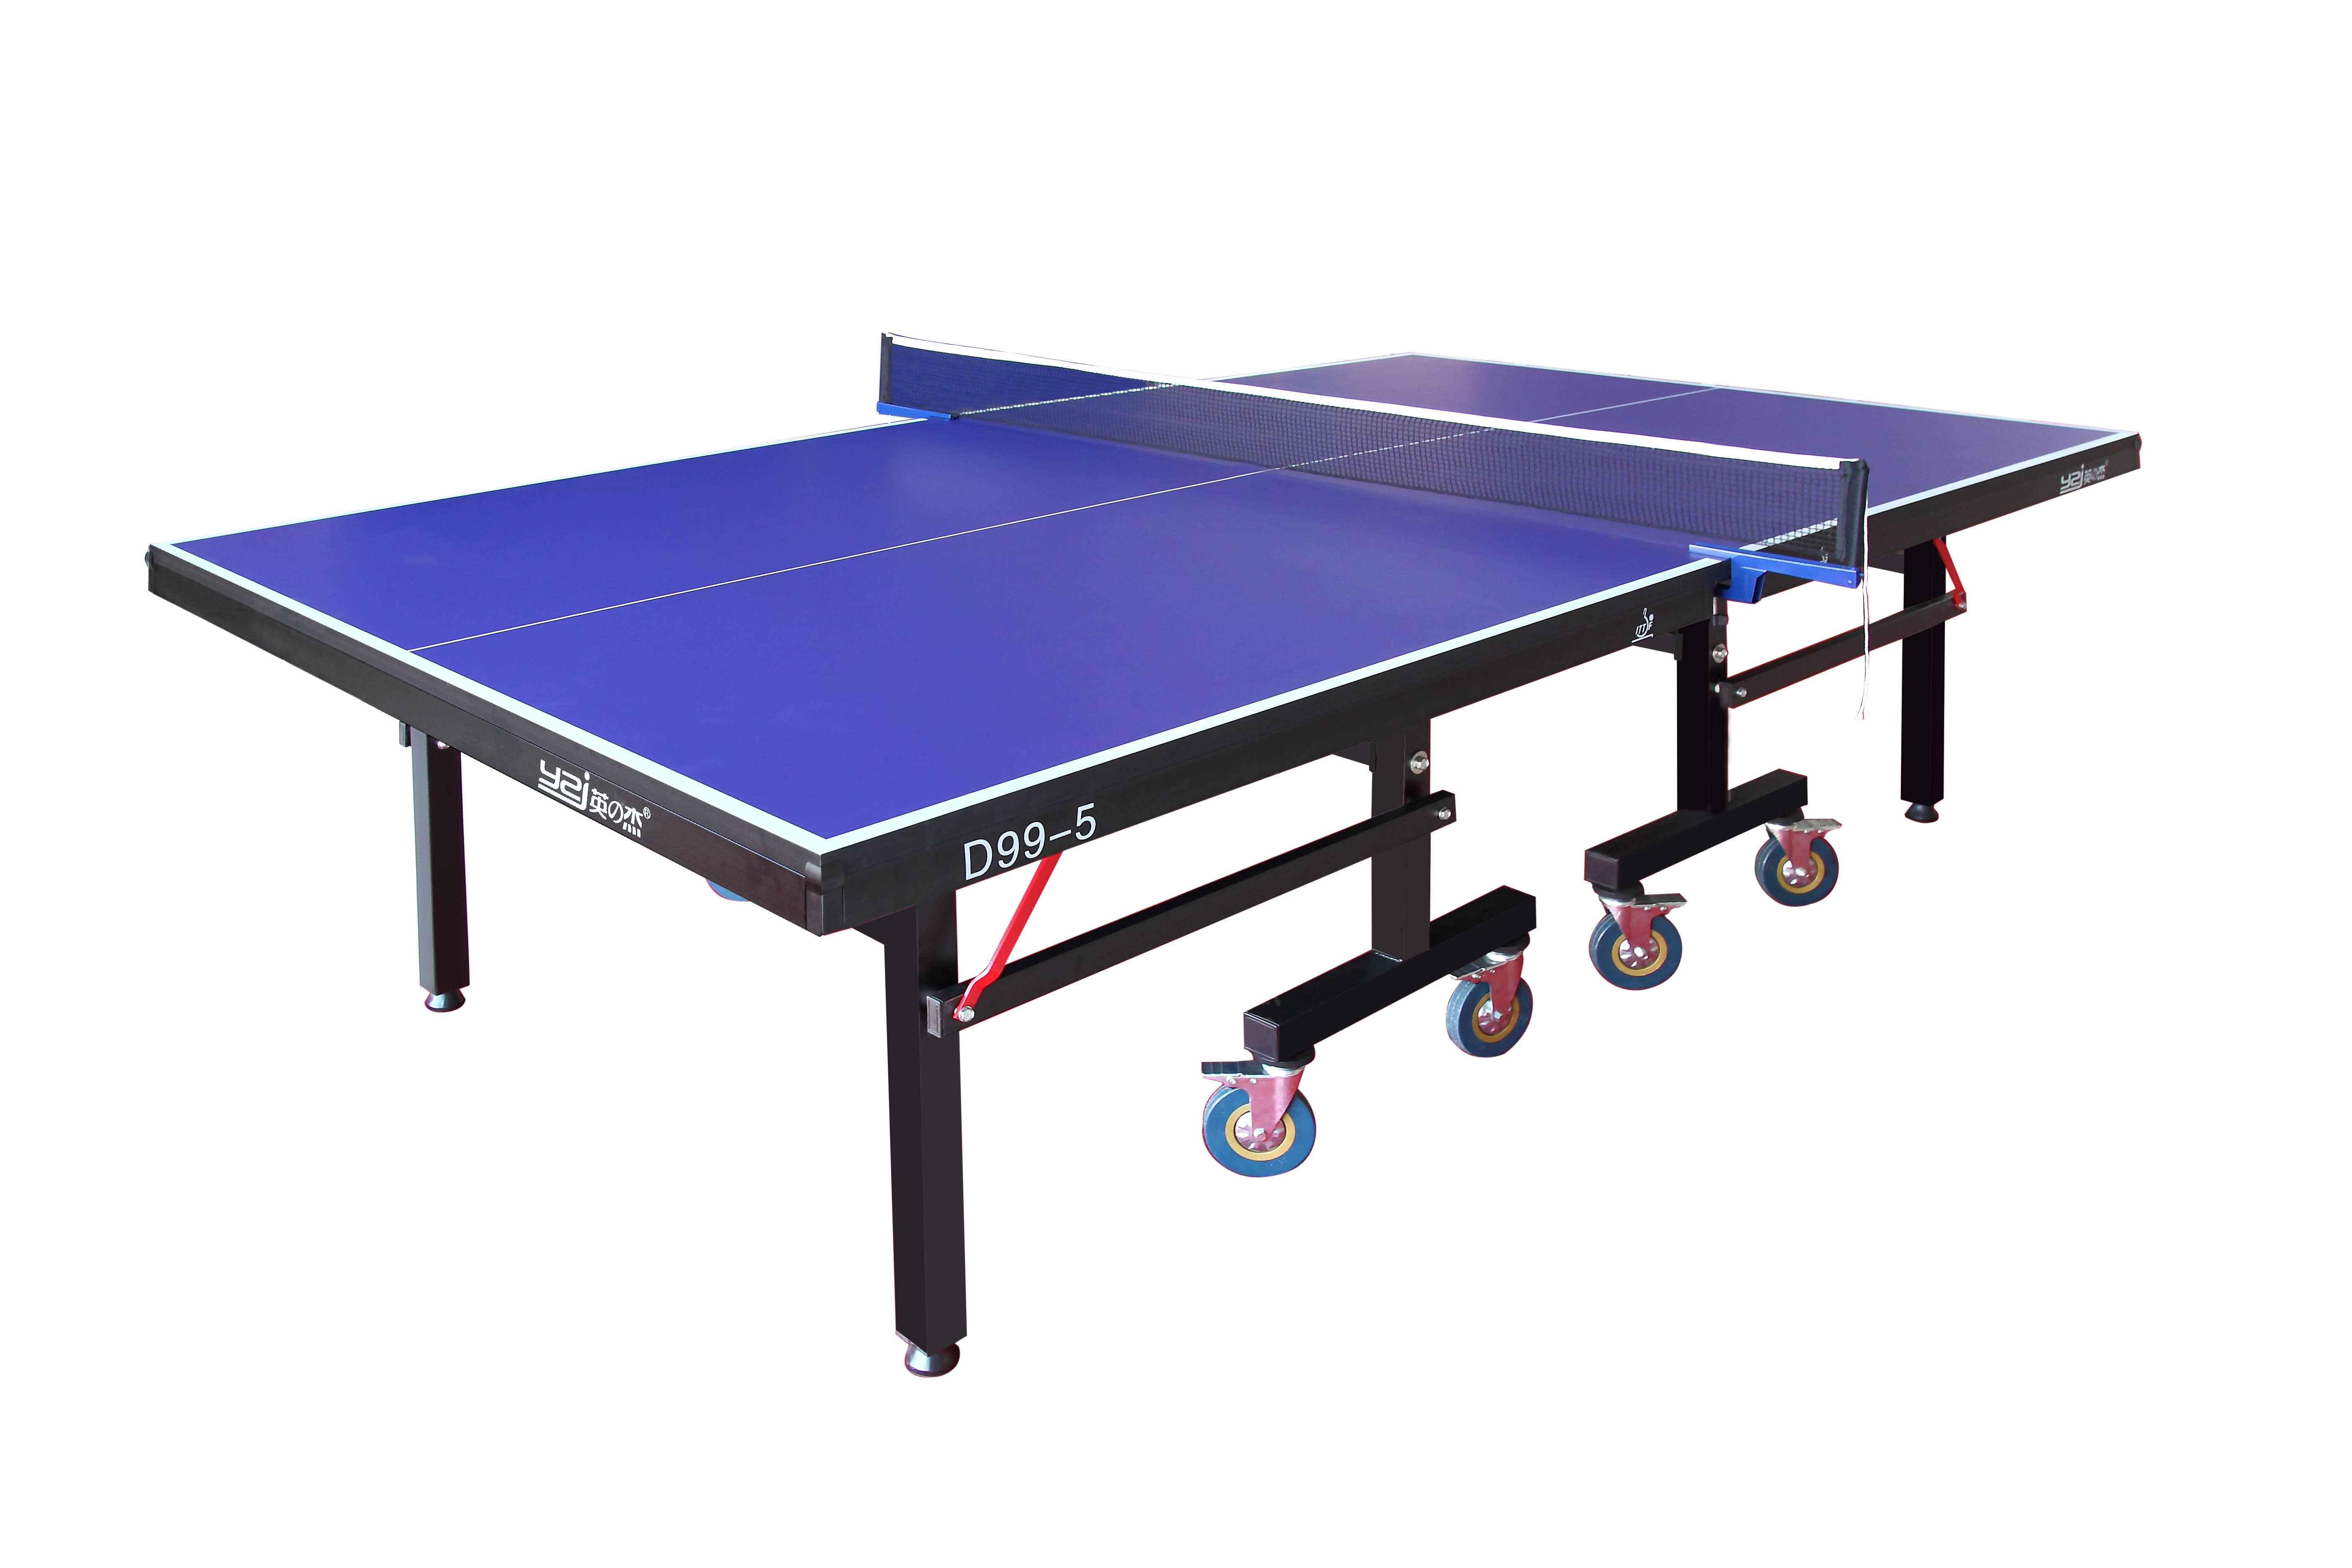 Table Tennis Table 25mm D99 5 Ittf Approved Free Shipping Melb Metro